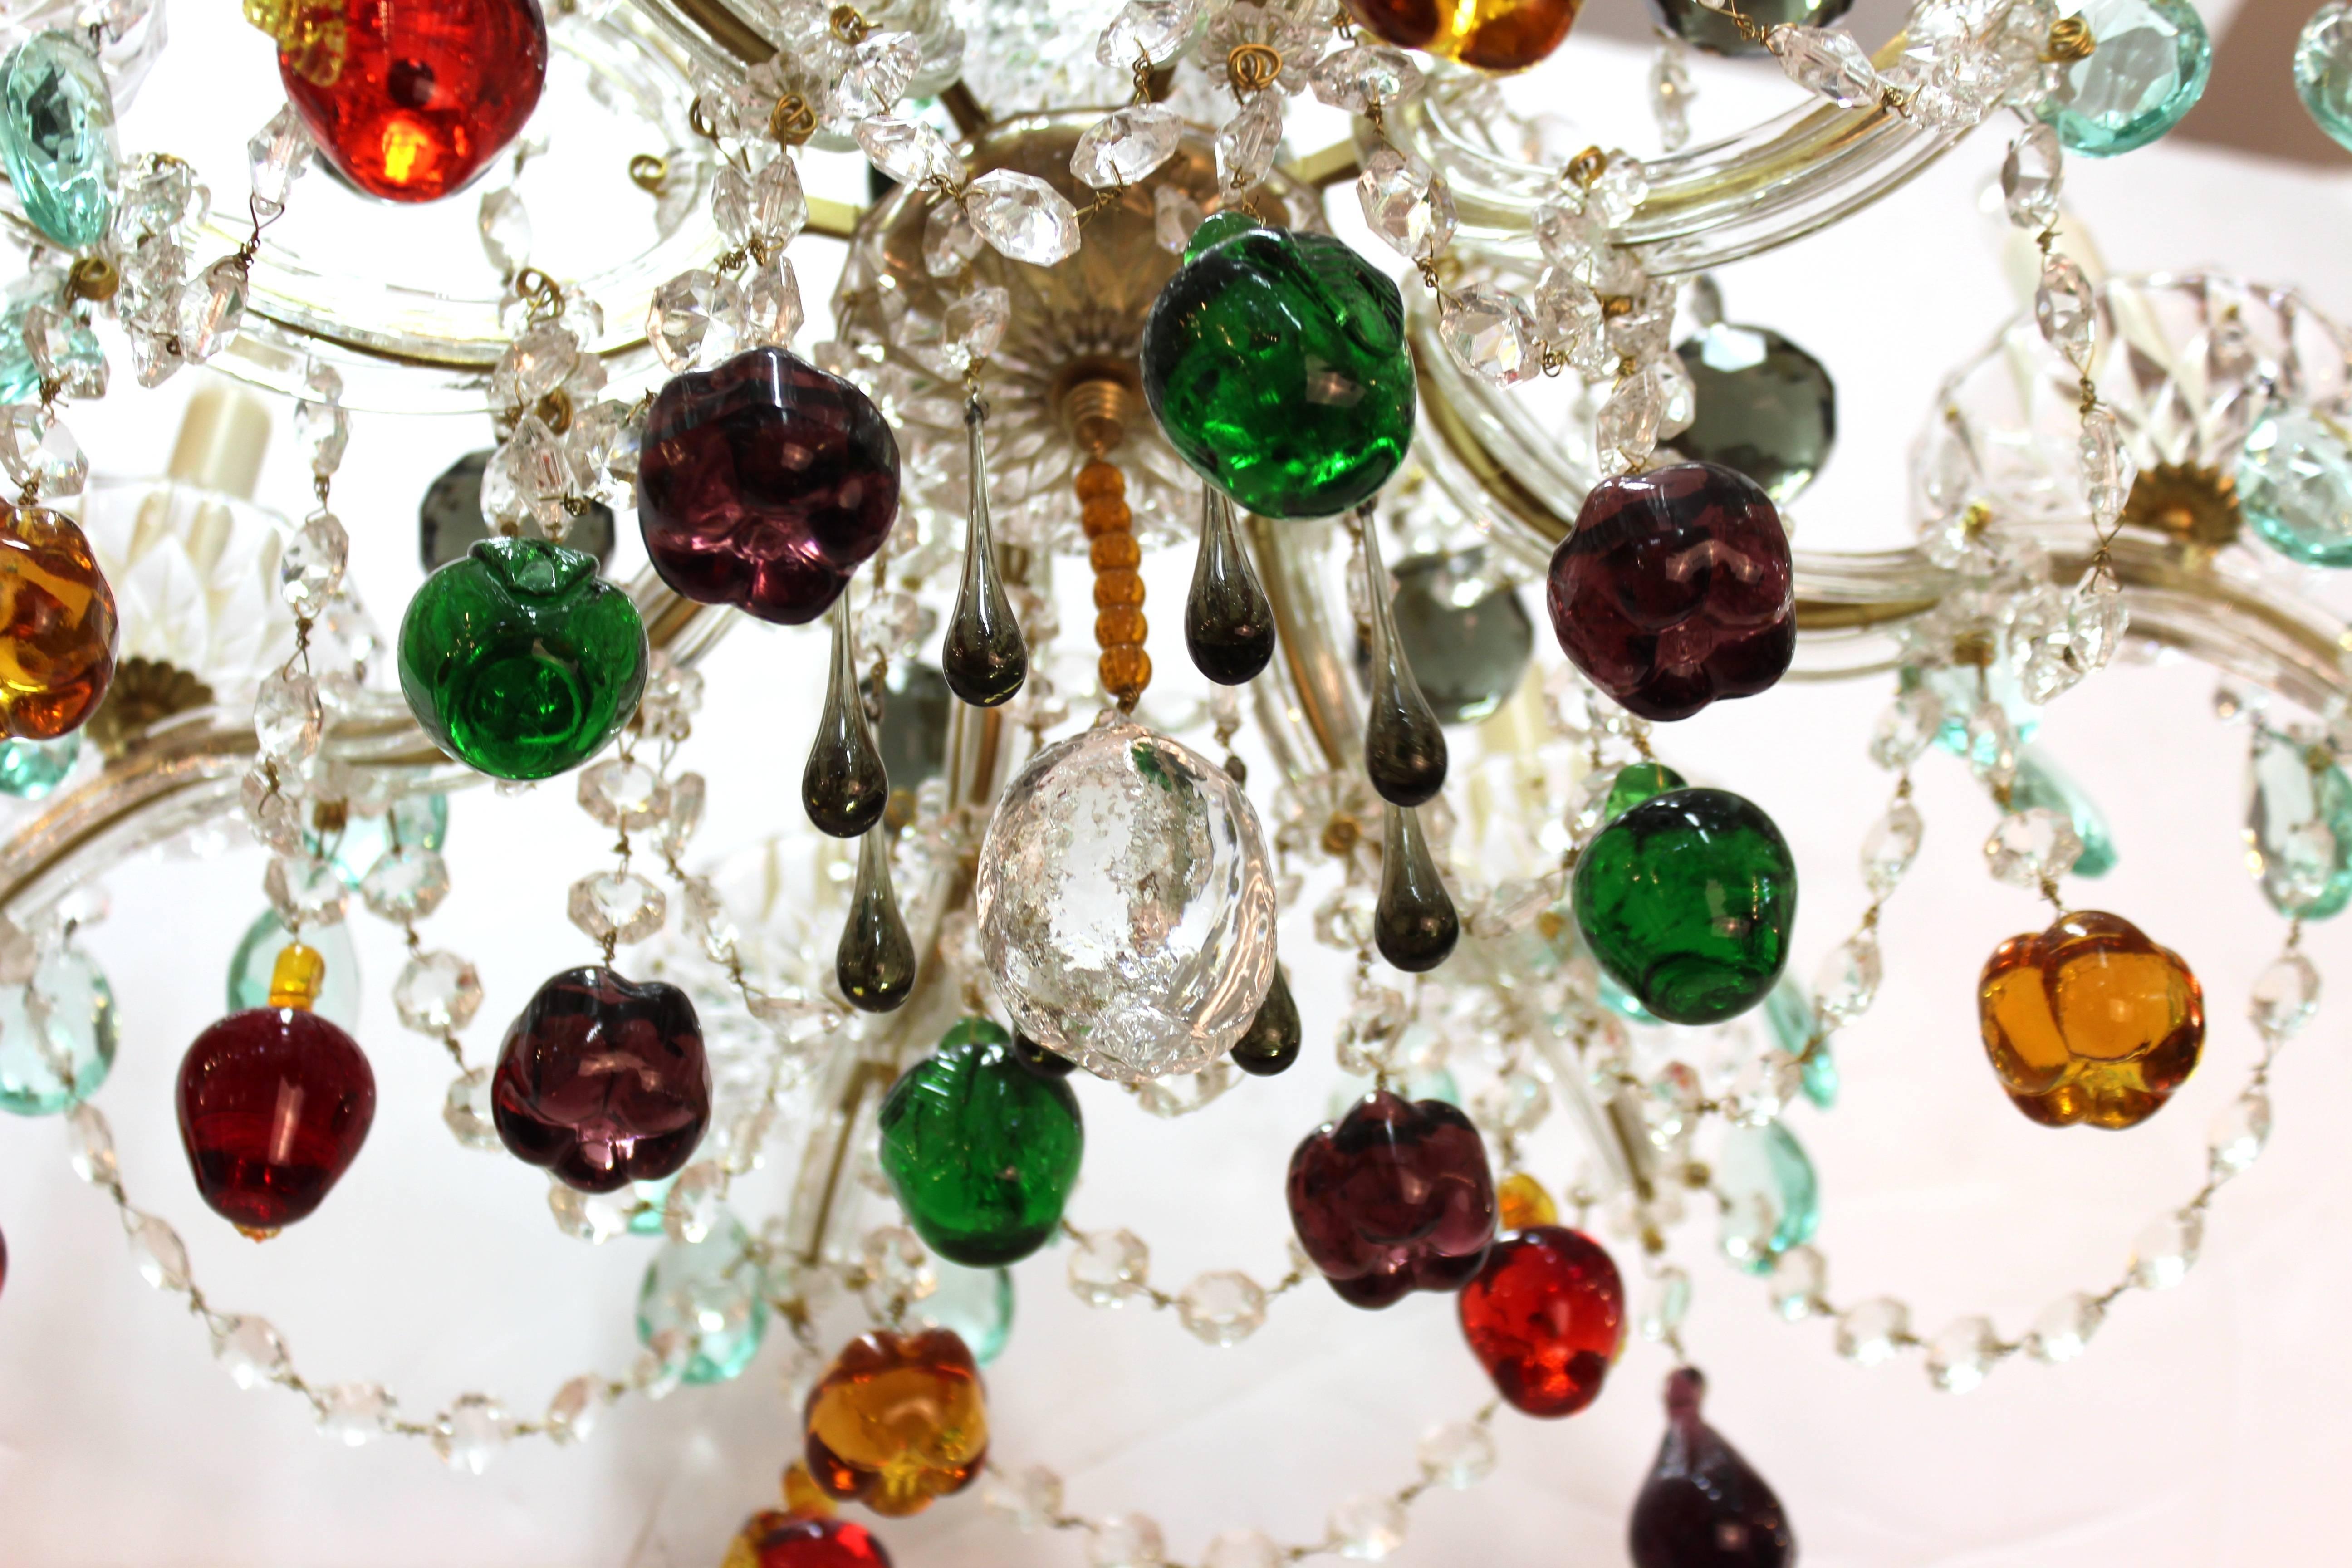 Italian Mid-Century Maria Theresa Chandelier with Fruit Crystals